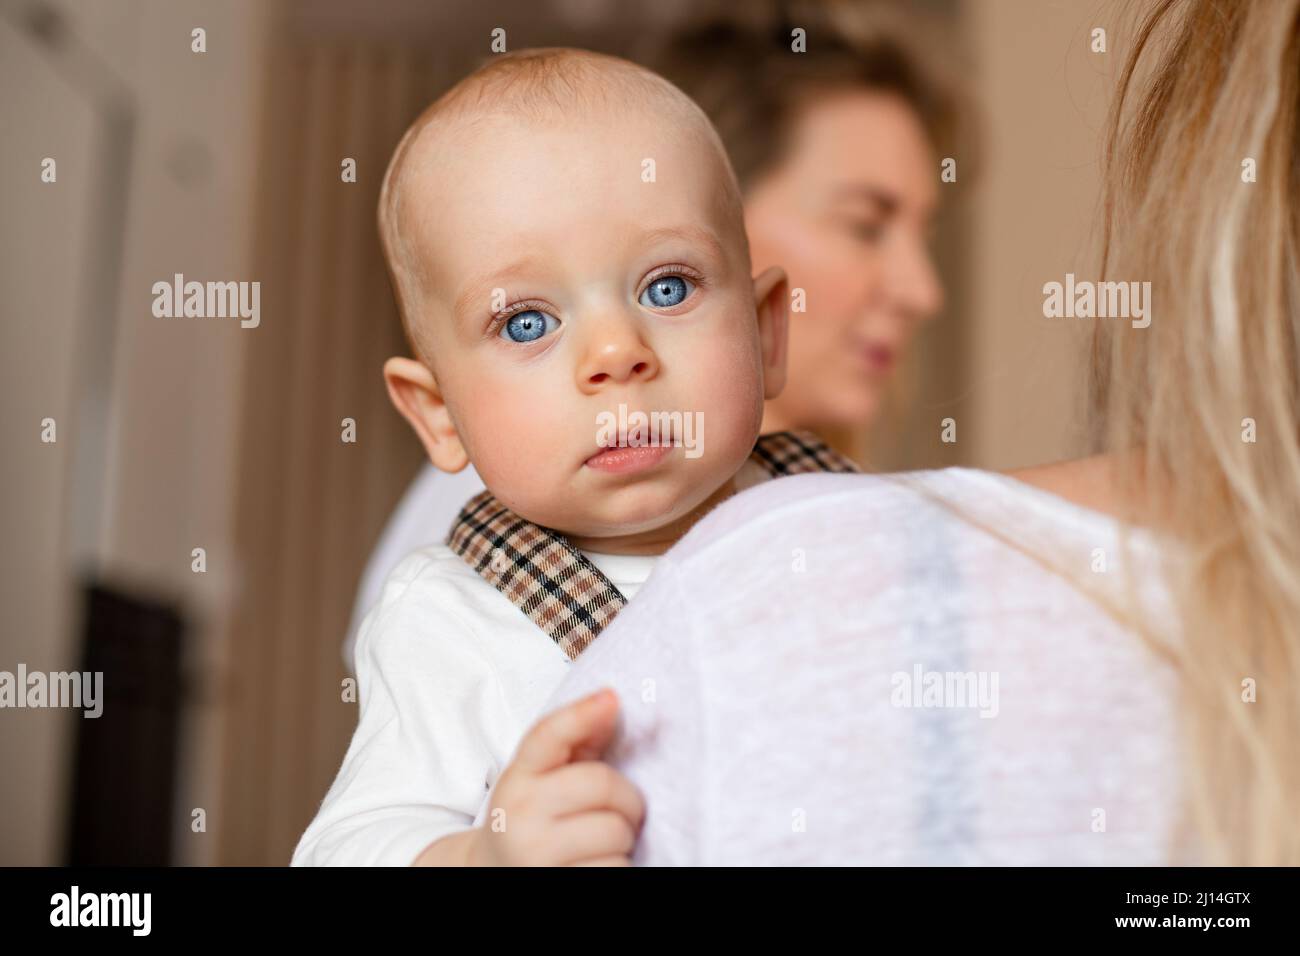 Cute blonde baby with big blue eyes looking at camera. Mom holds her toddler in her hands Stock Photo